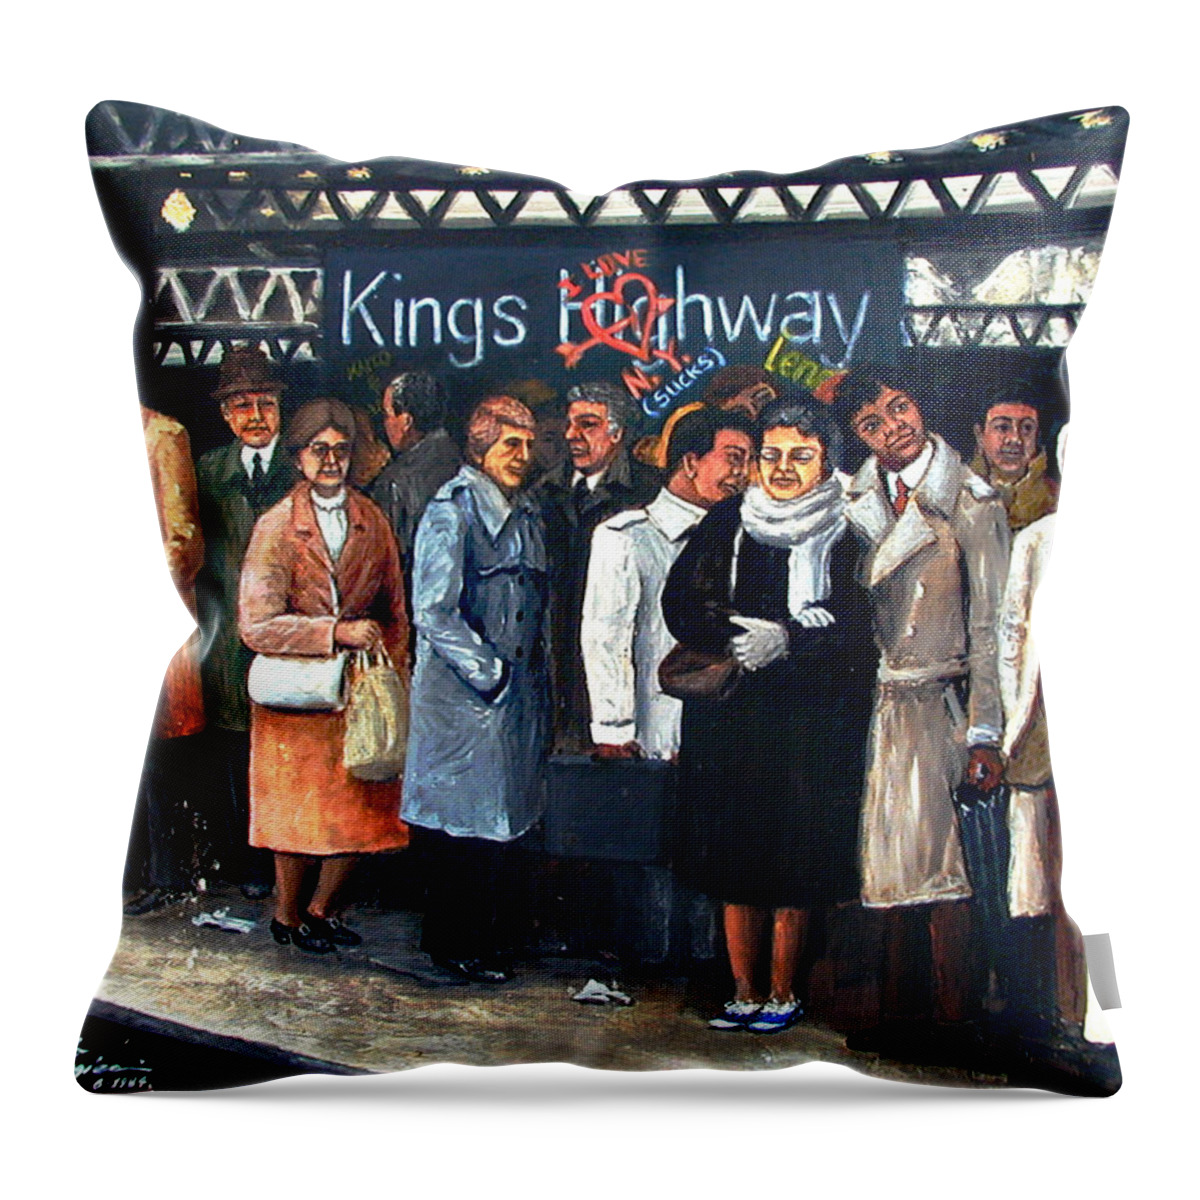 Ny City Throw Pillow featuring the painting Kings Highway Subway Station by Leonardo Ruggieri